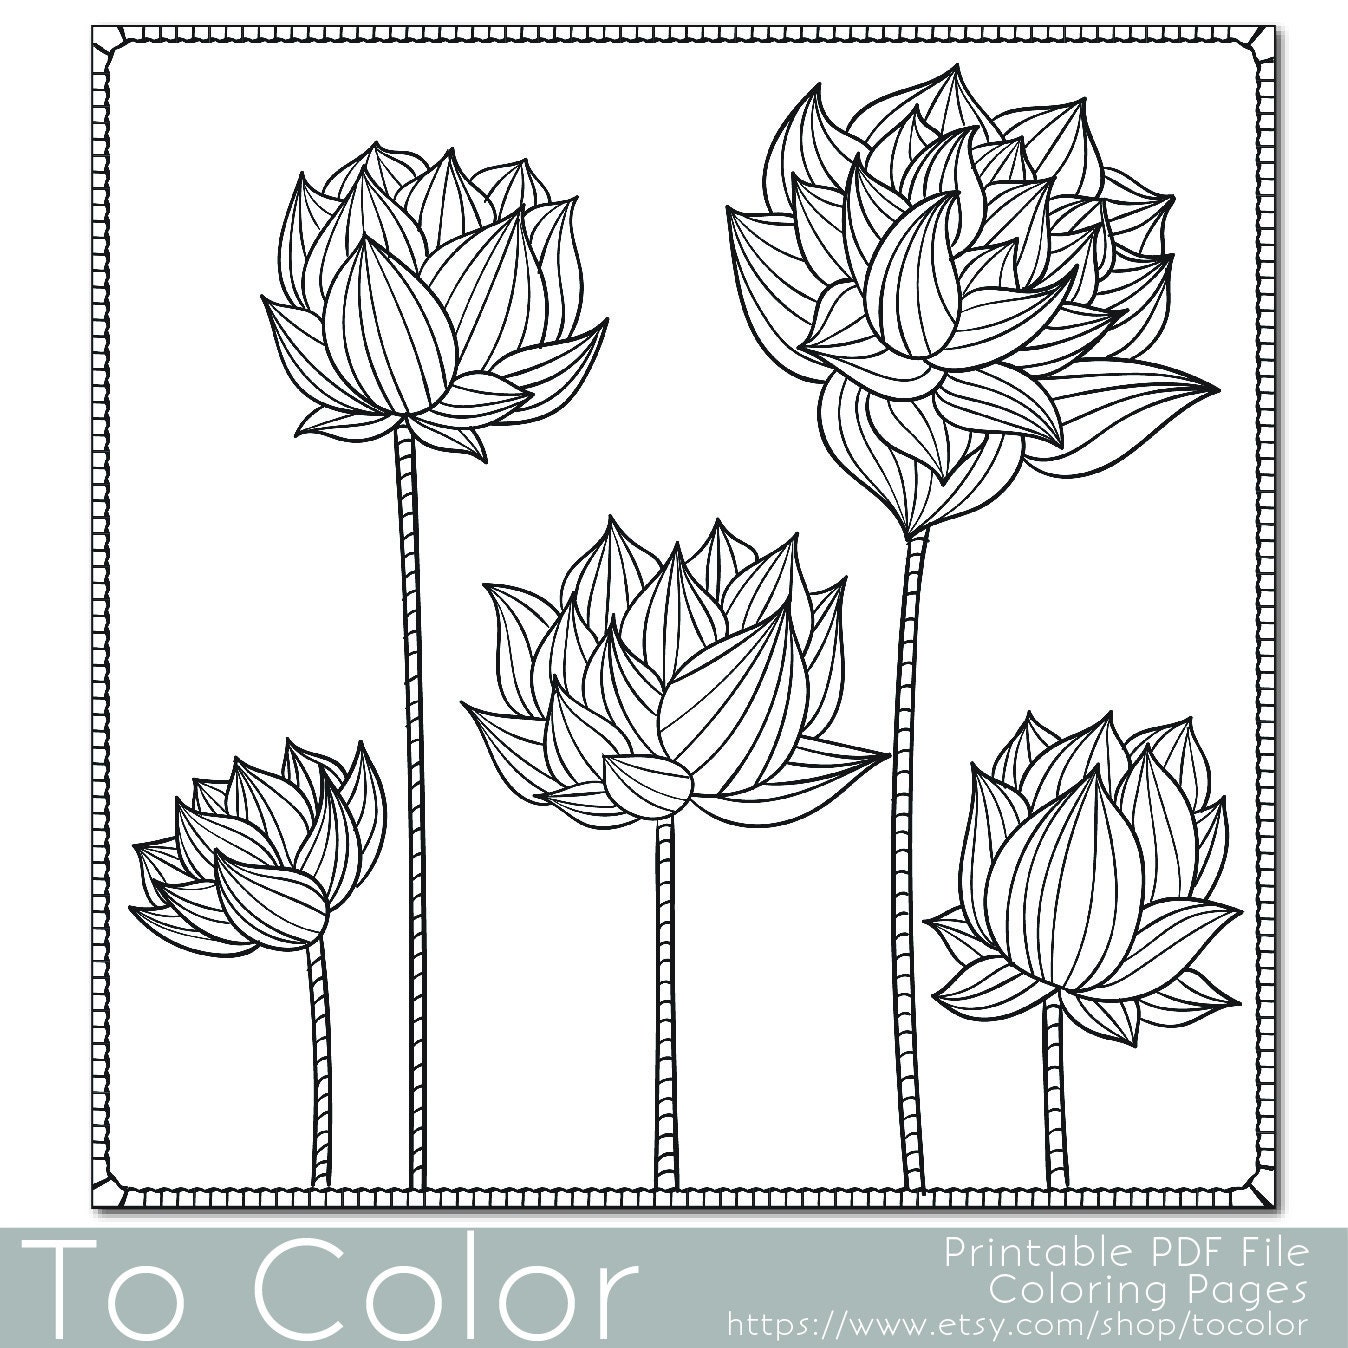 Floral Lotus Flower Coloring Page for Adults PDF / JPG by ...